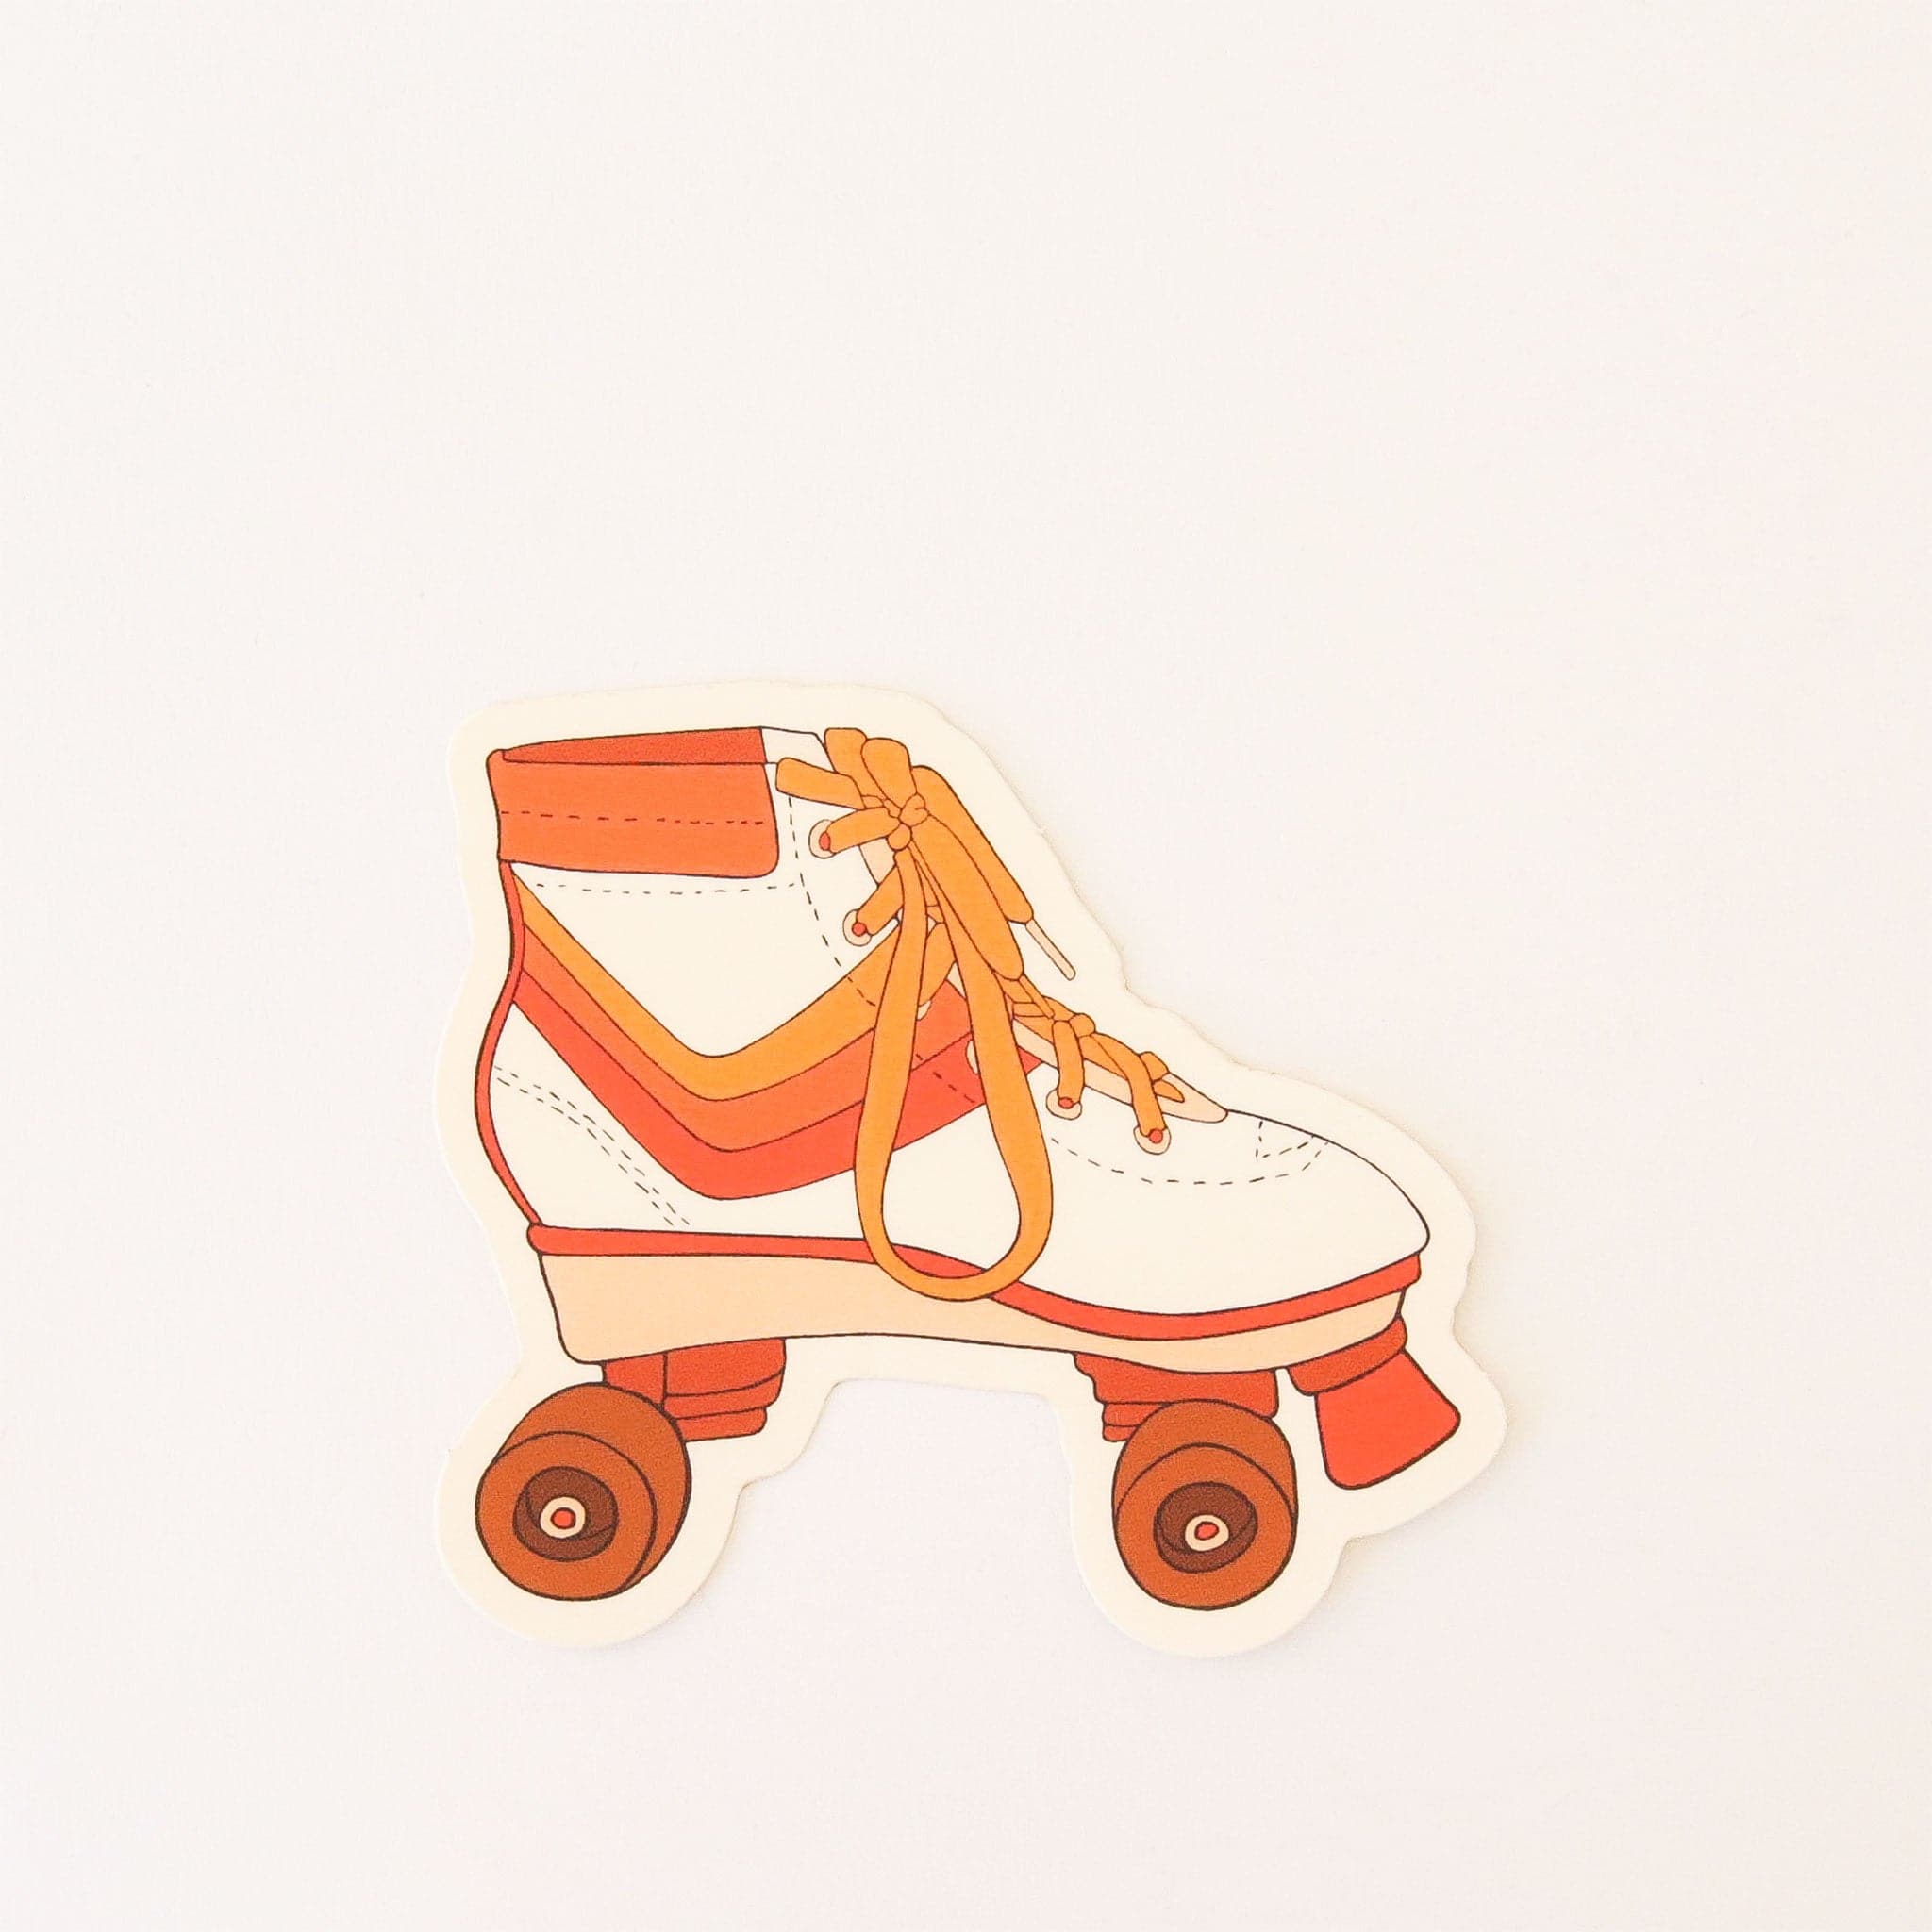 This is a white sticker cut into the shape of the side view of a roller skate. The skate has mustard yellow laces. There is a mustard yellow, light orange and orange stripe in the middle. There are two dark orange wheels and an orange stopper on the front. 